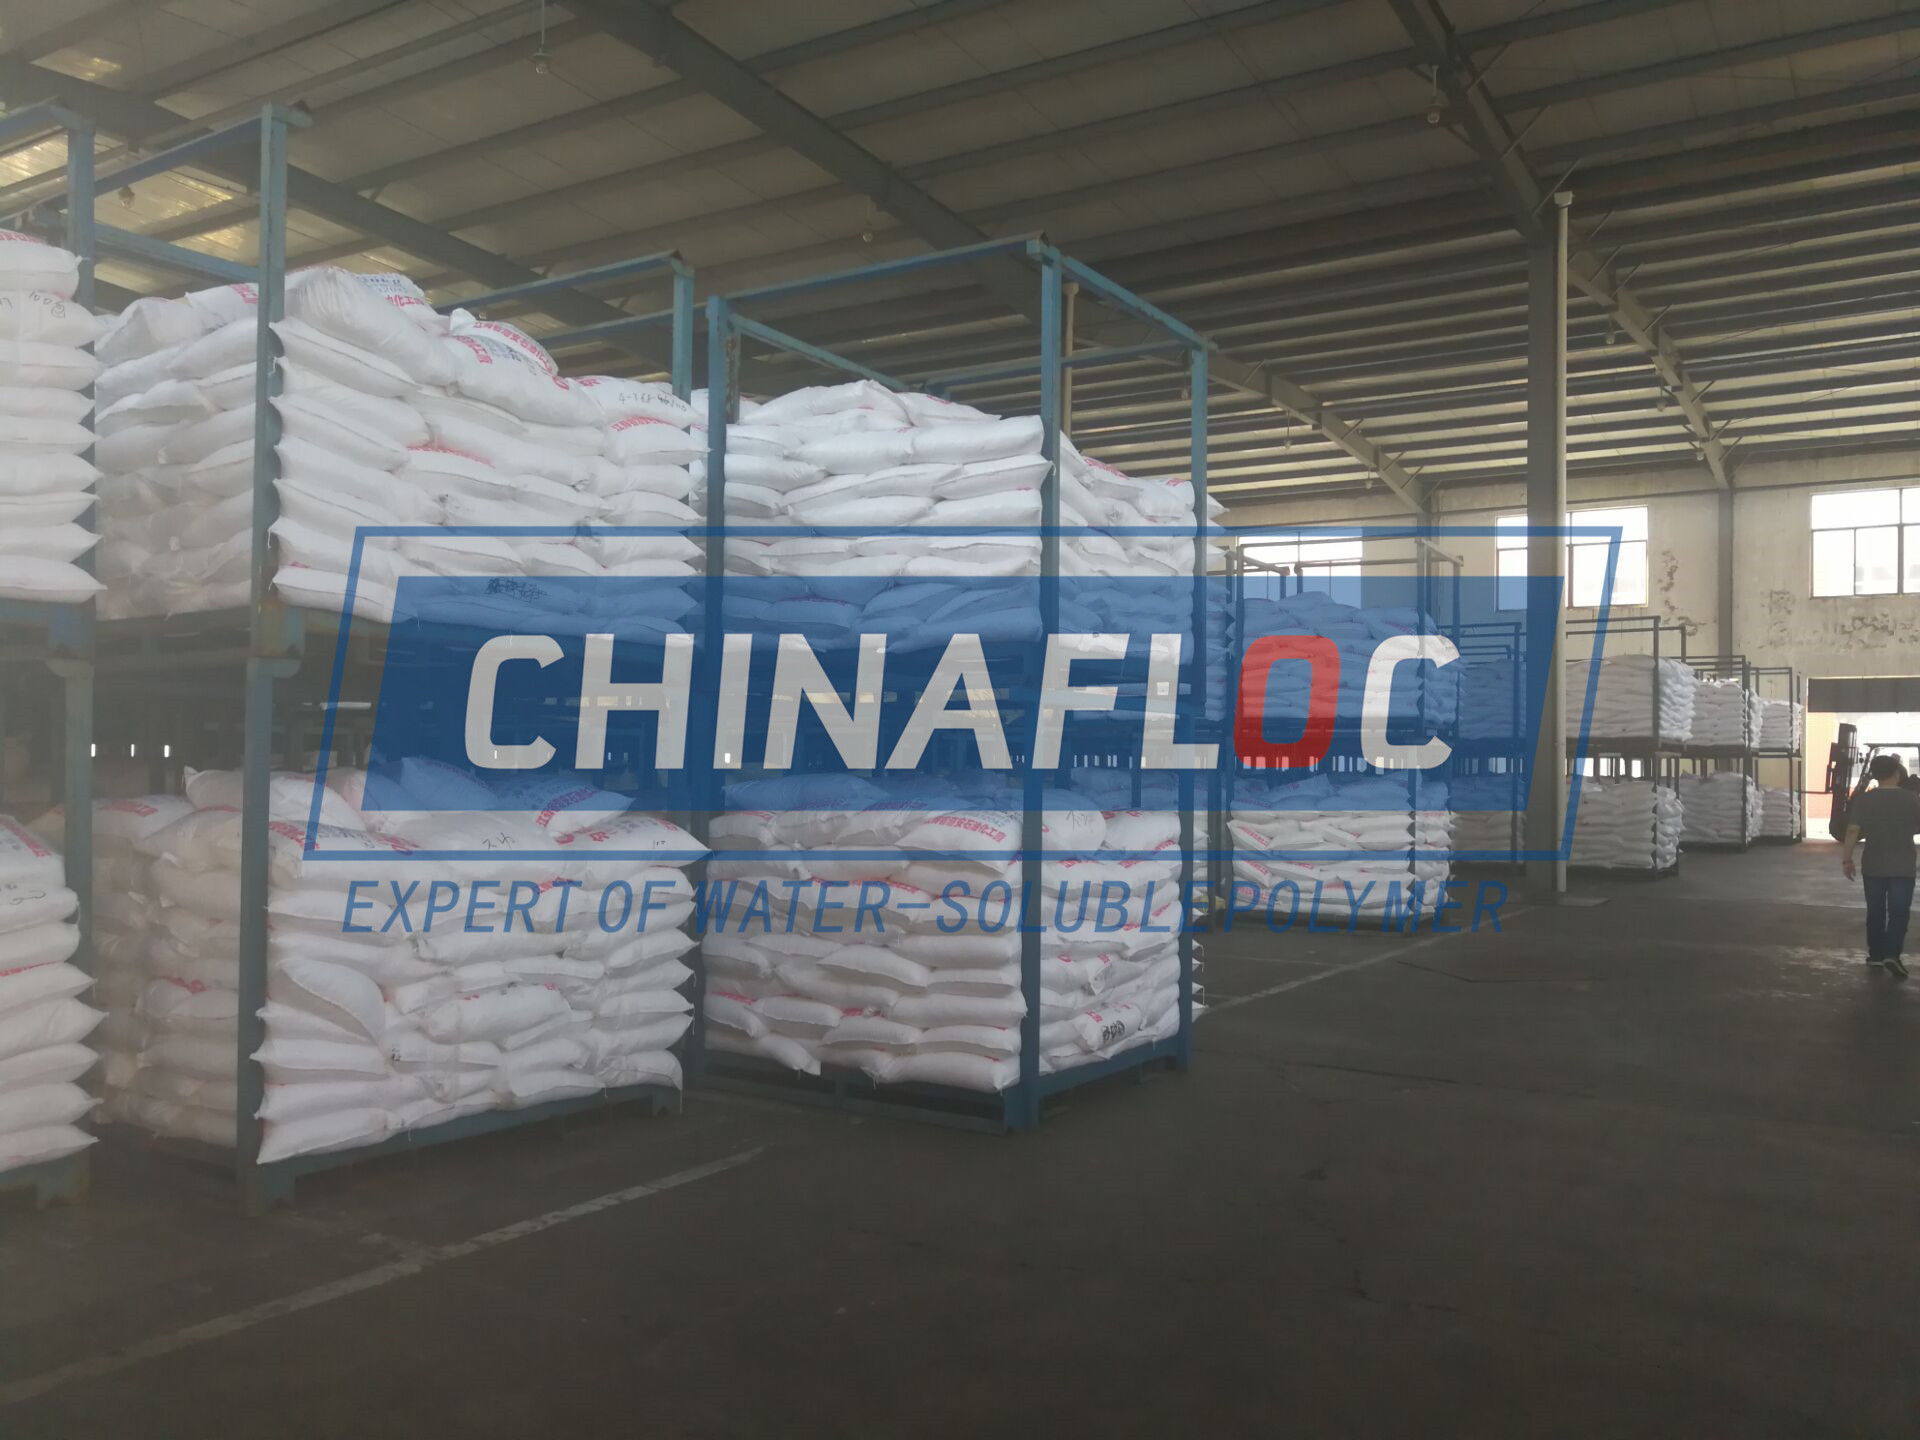 Emulsion cationic polyacrylamide(FLOPAM EM140,145,240,340)can be replaced  by Chinafloc EM C series , China Emulsion cationic polyacrylamide(FLOPAM  EM140,145,240,340)can be replaced by Chinafloc EM C series manufacturer and  supplier - CHINAFLOC